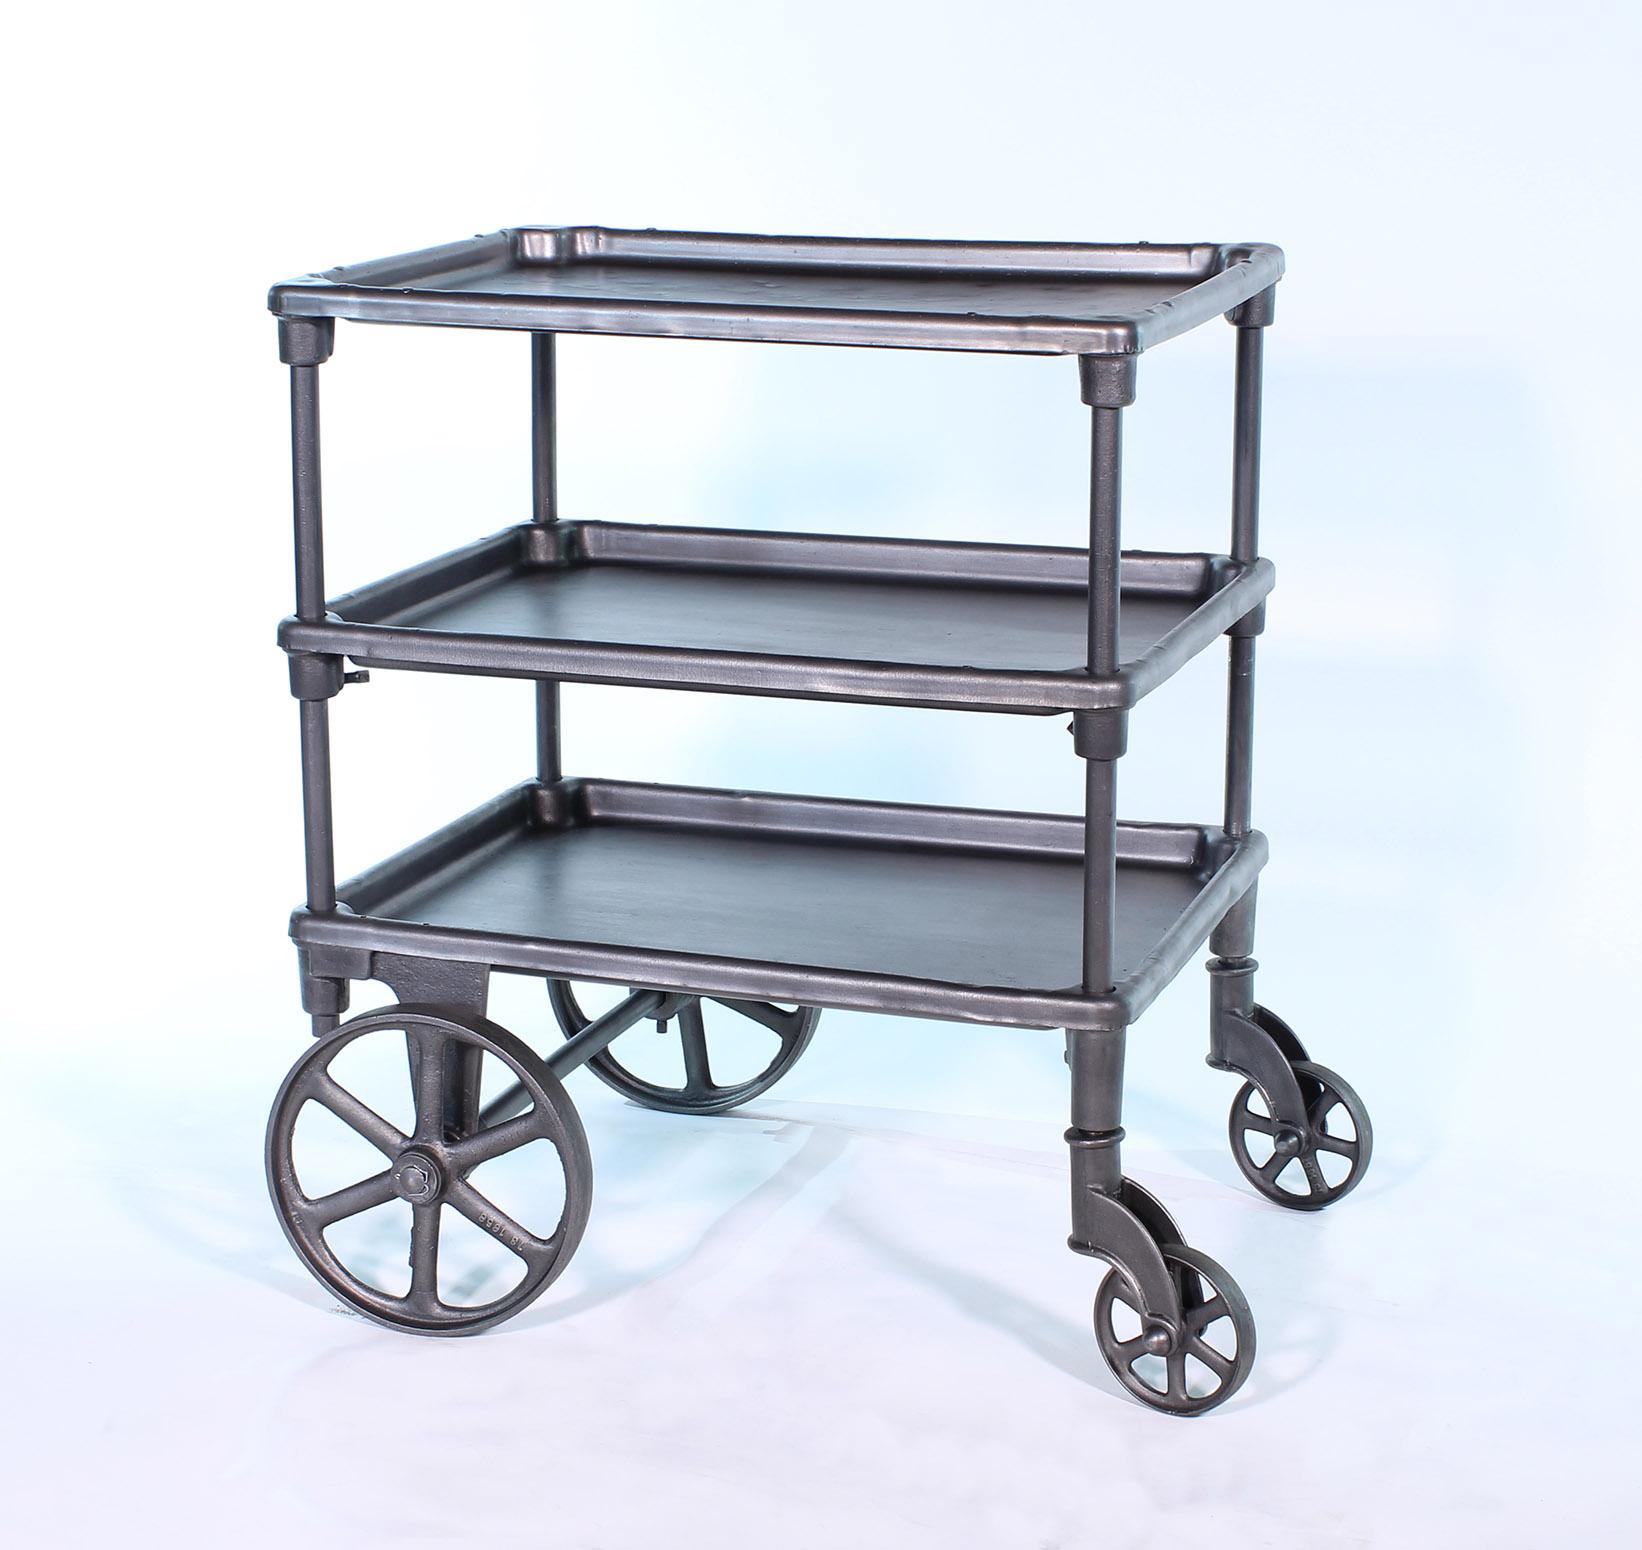 Authentic early 1900s cast iron and steel adjustable three-tier rolling bar cart on castors. Middle shelf is adjustable in height. Top measures 26 1/4